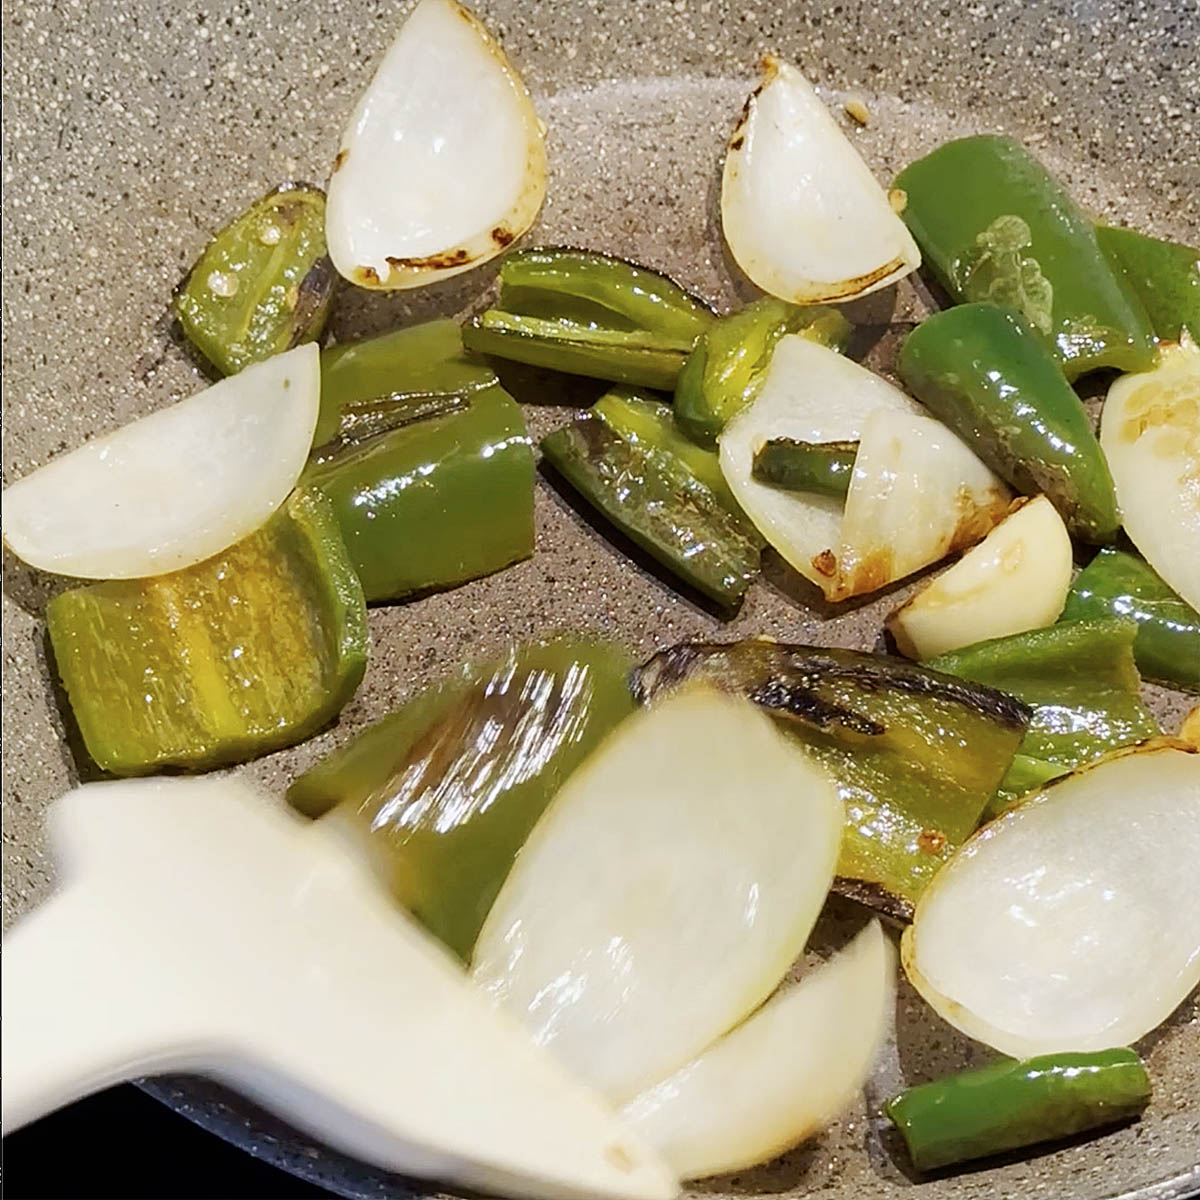 Sauteing onions and jalapeños in a skillet.